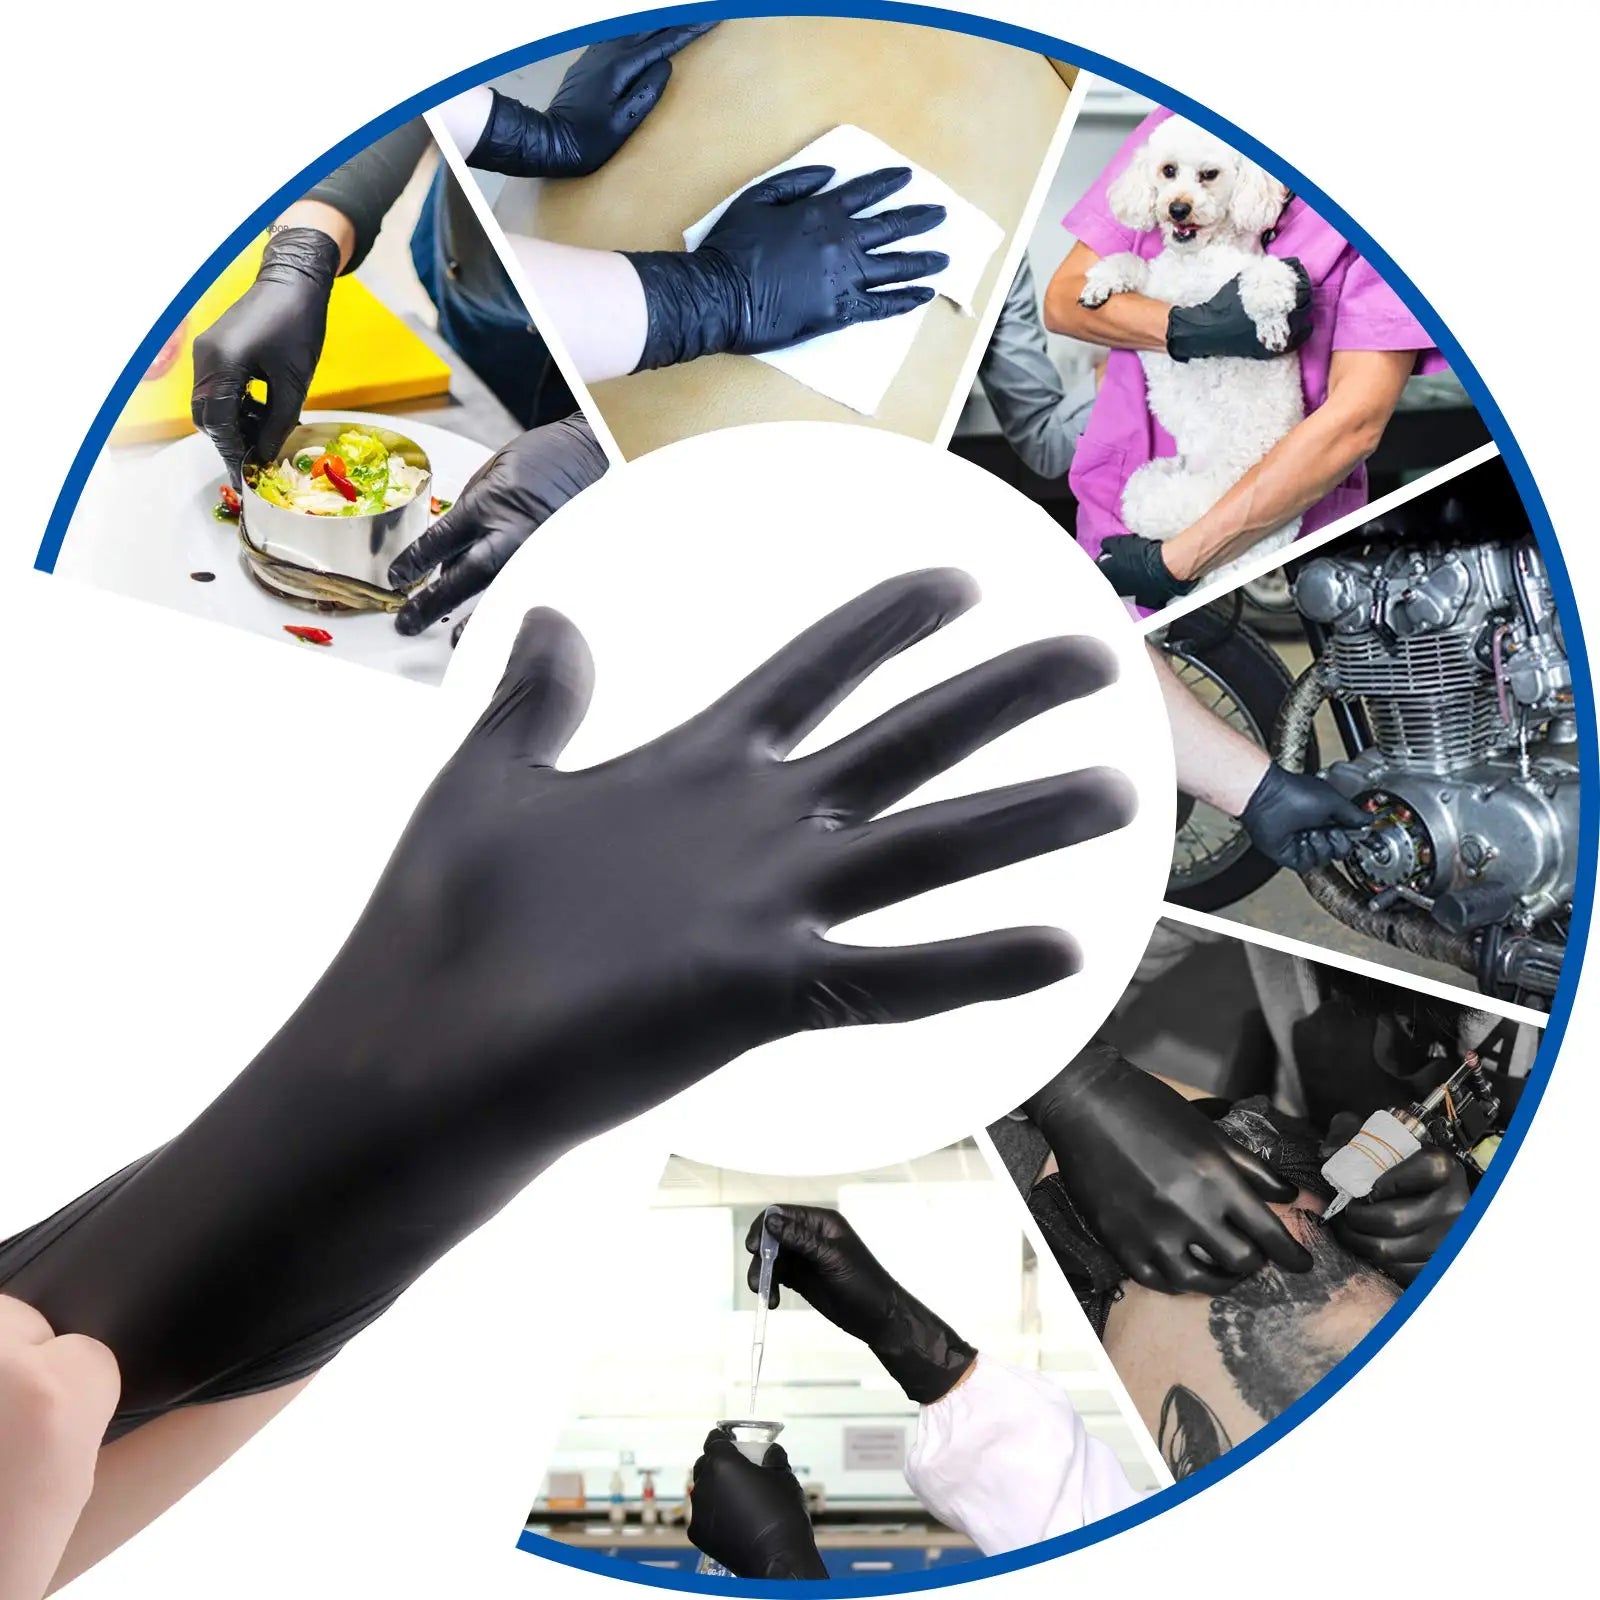  100 Pack Disposable Black Nitrile Gloves For Household Cleaning Work Safety Tools  Gardening Gloves  Kitchen Cooking Tools 